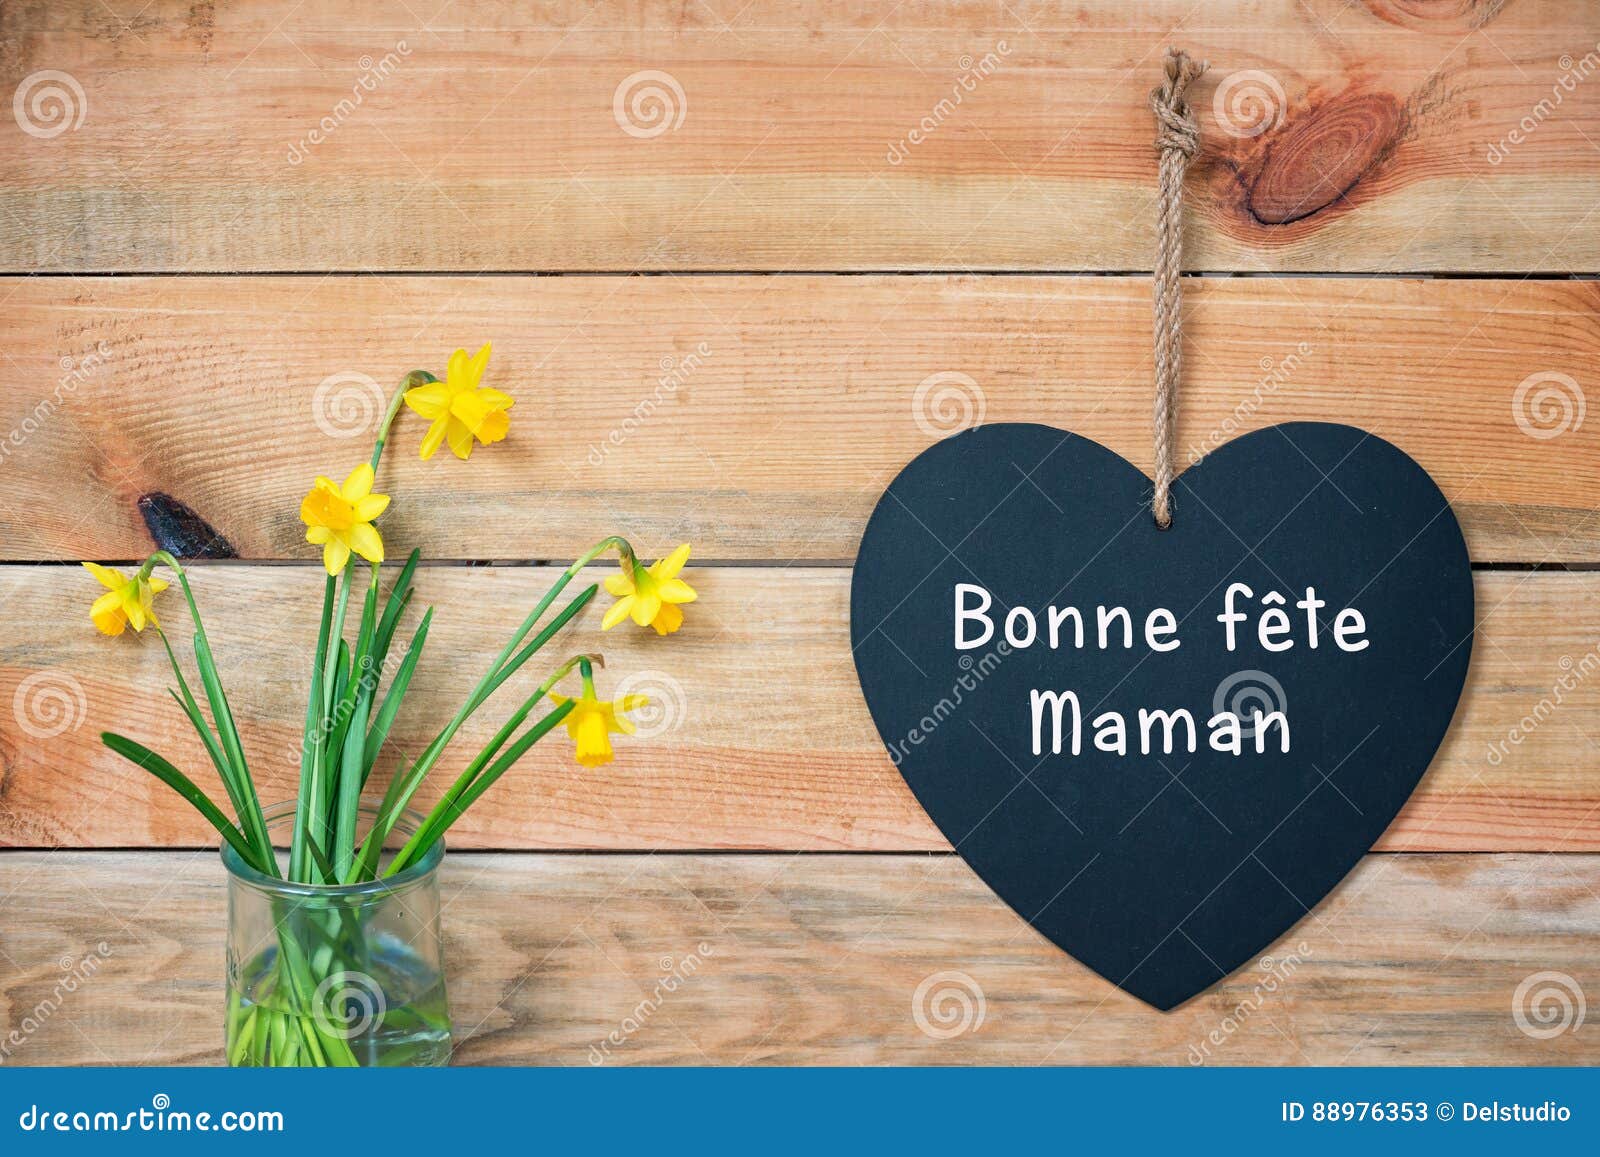 bonne fete maman, french mothers day card, wood planks with daffodils and a blackboard in  of a heart